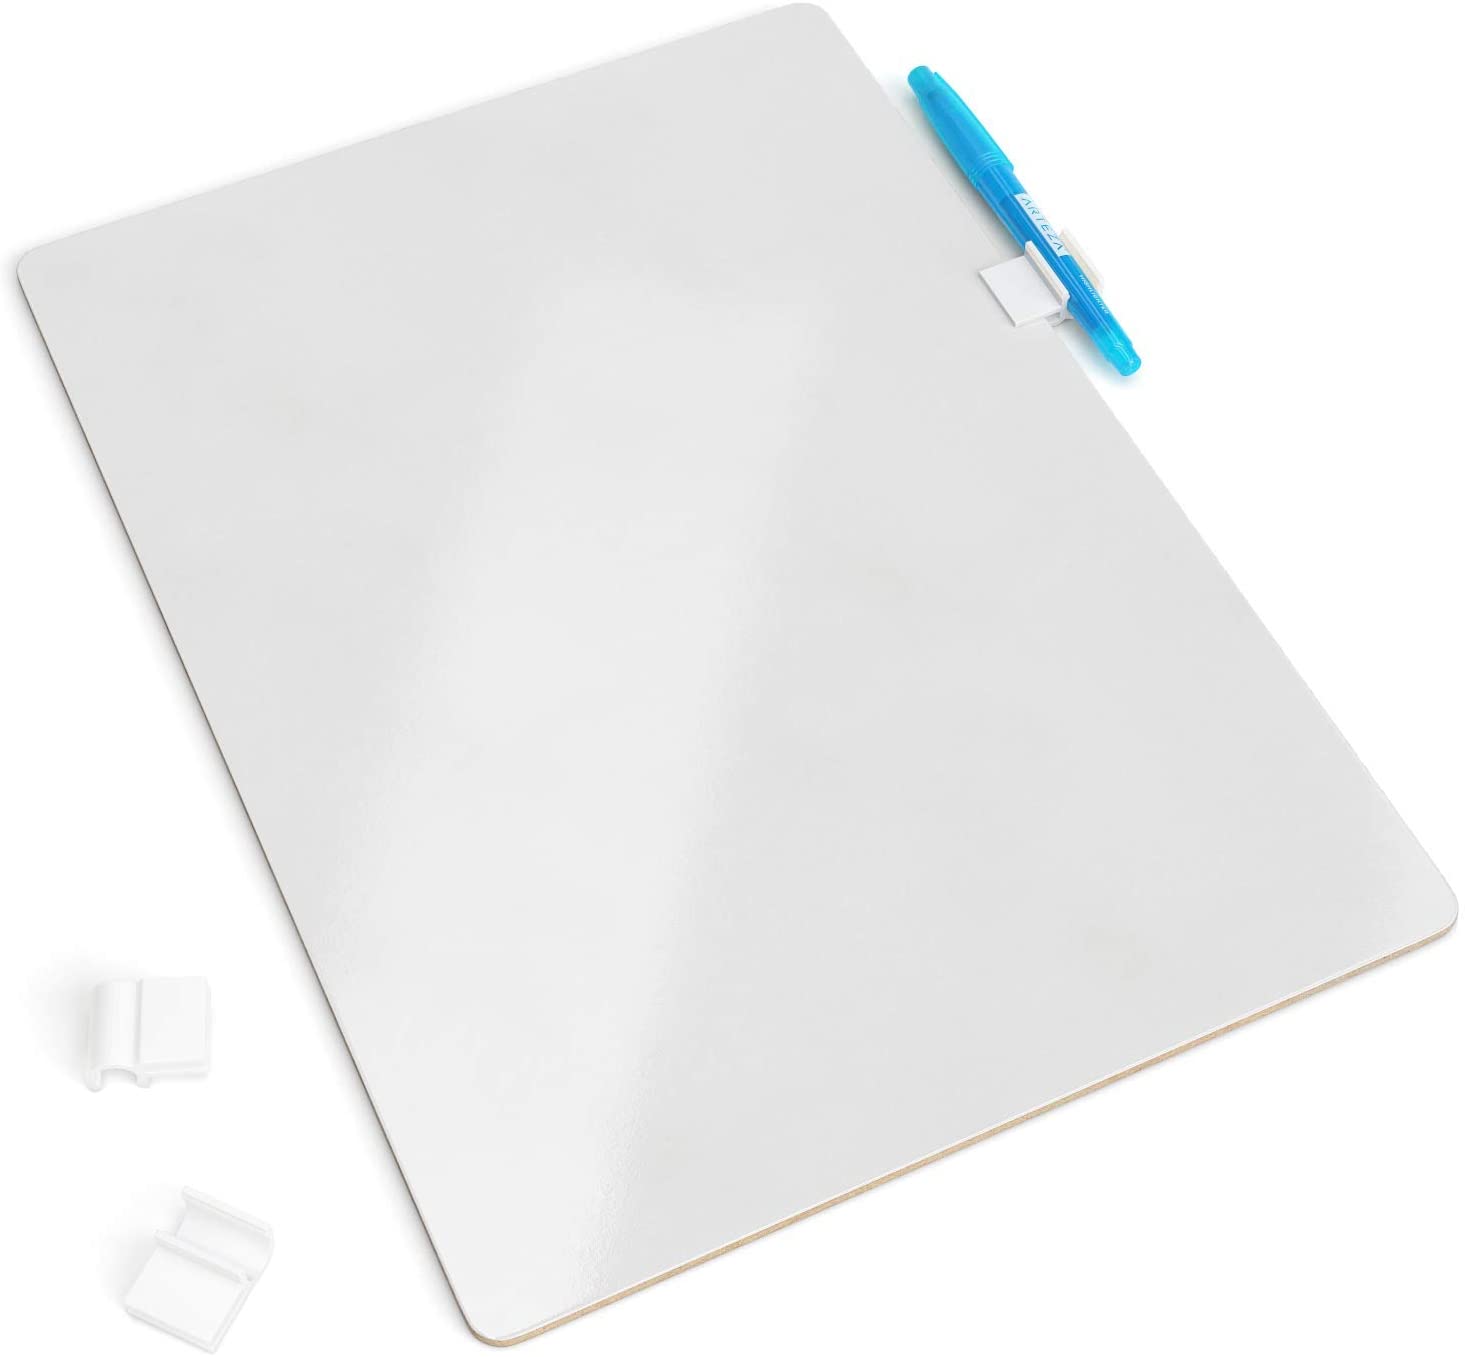 Dry Erase White Board with Lap Board: Hanging Indonesia